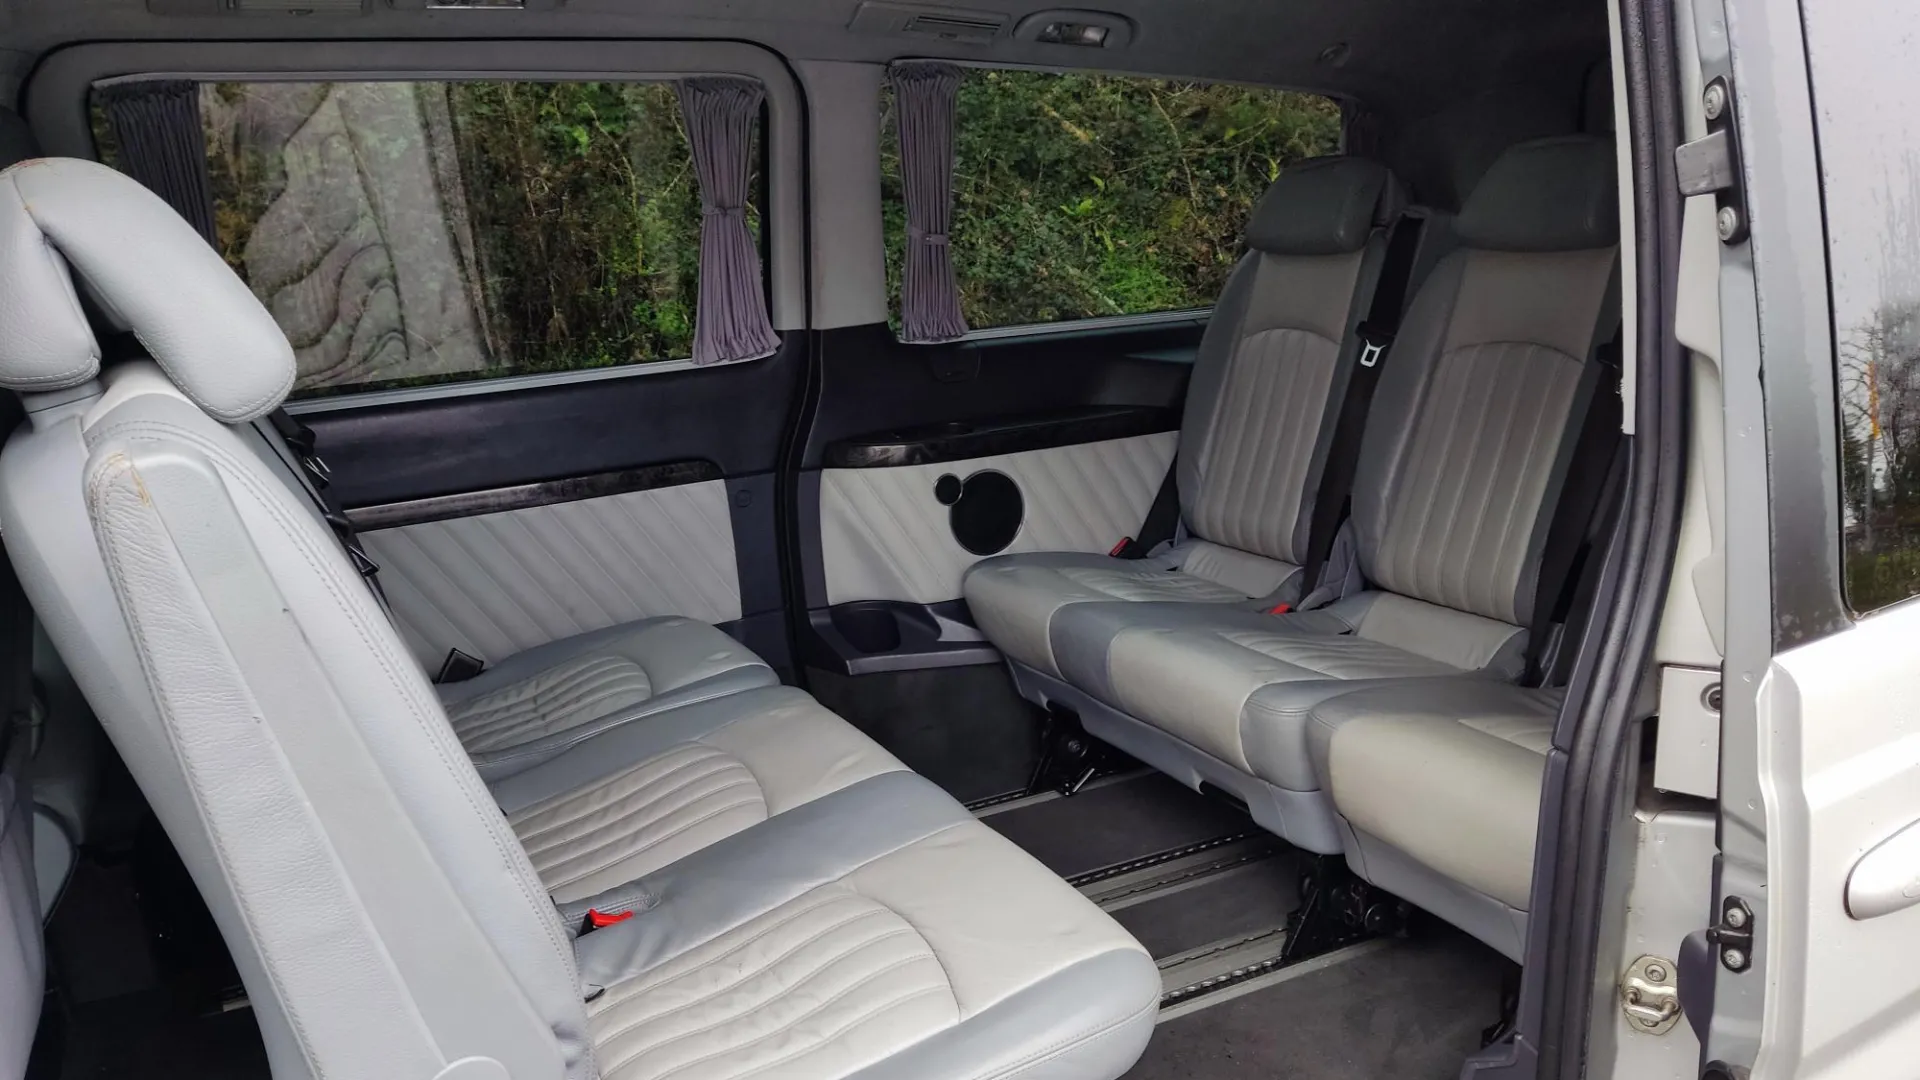 rear cream leather interior of Mercedes Viano showing 6 seats facing each others